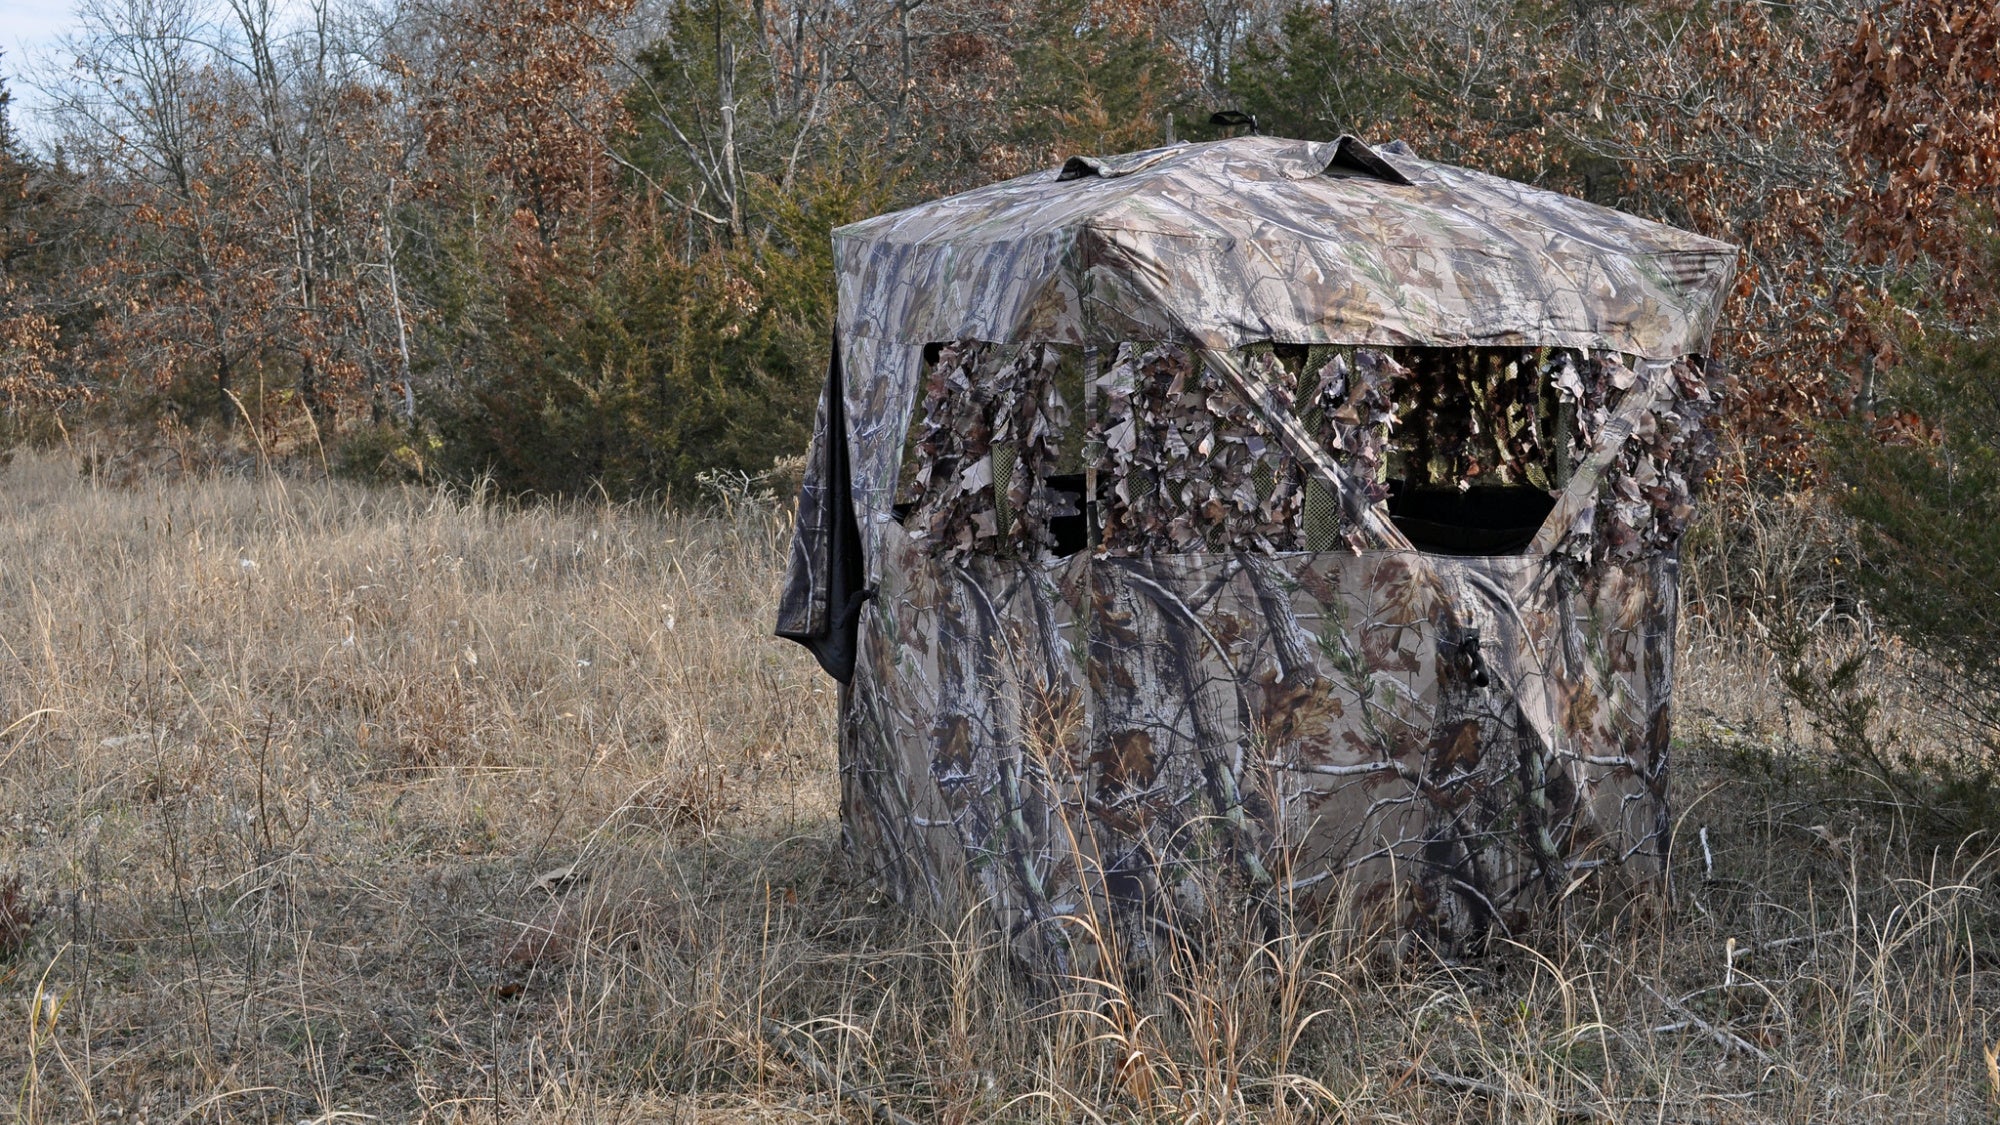 ground blind in midwest